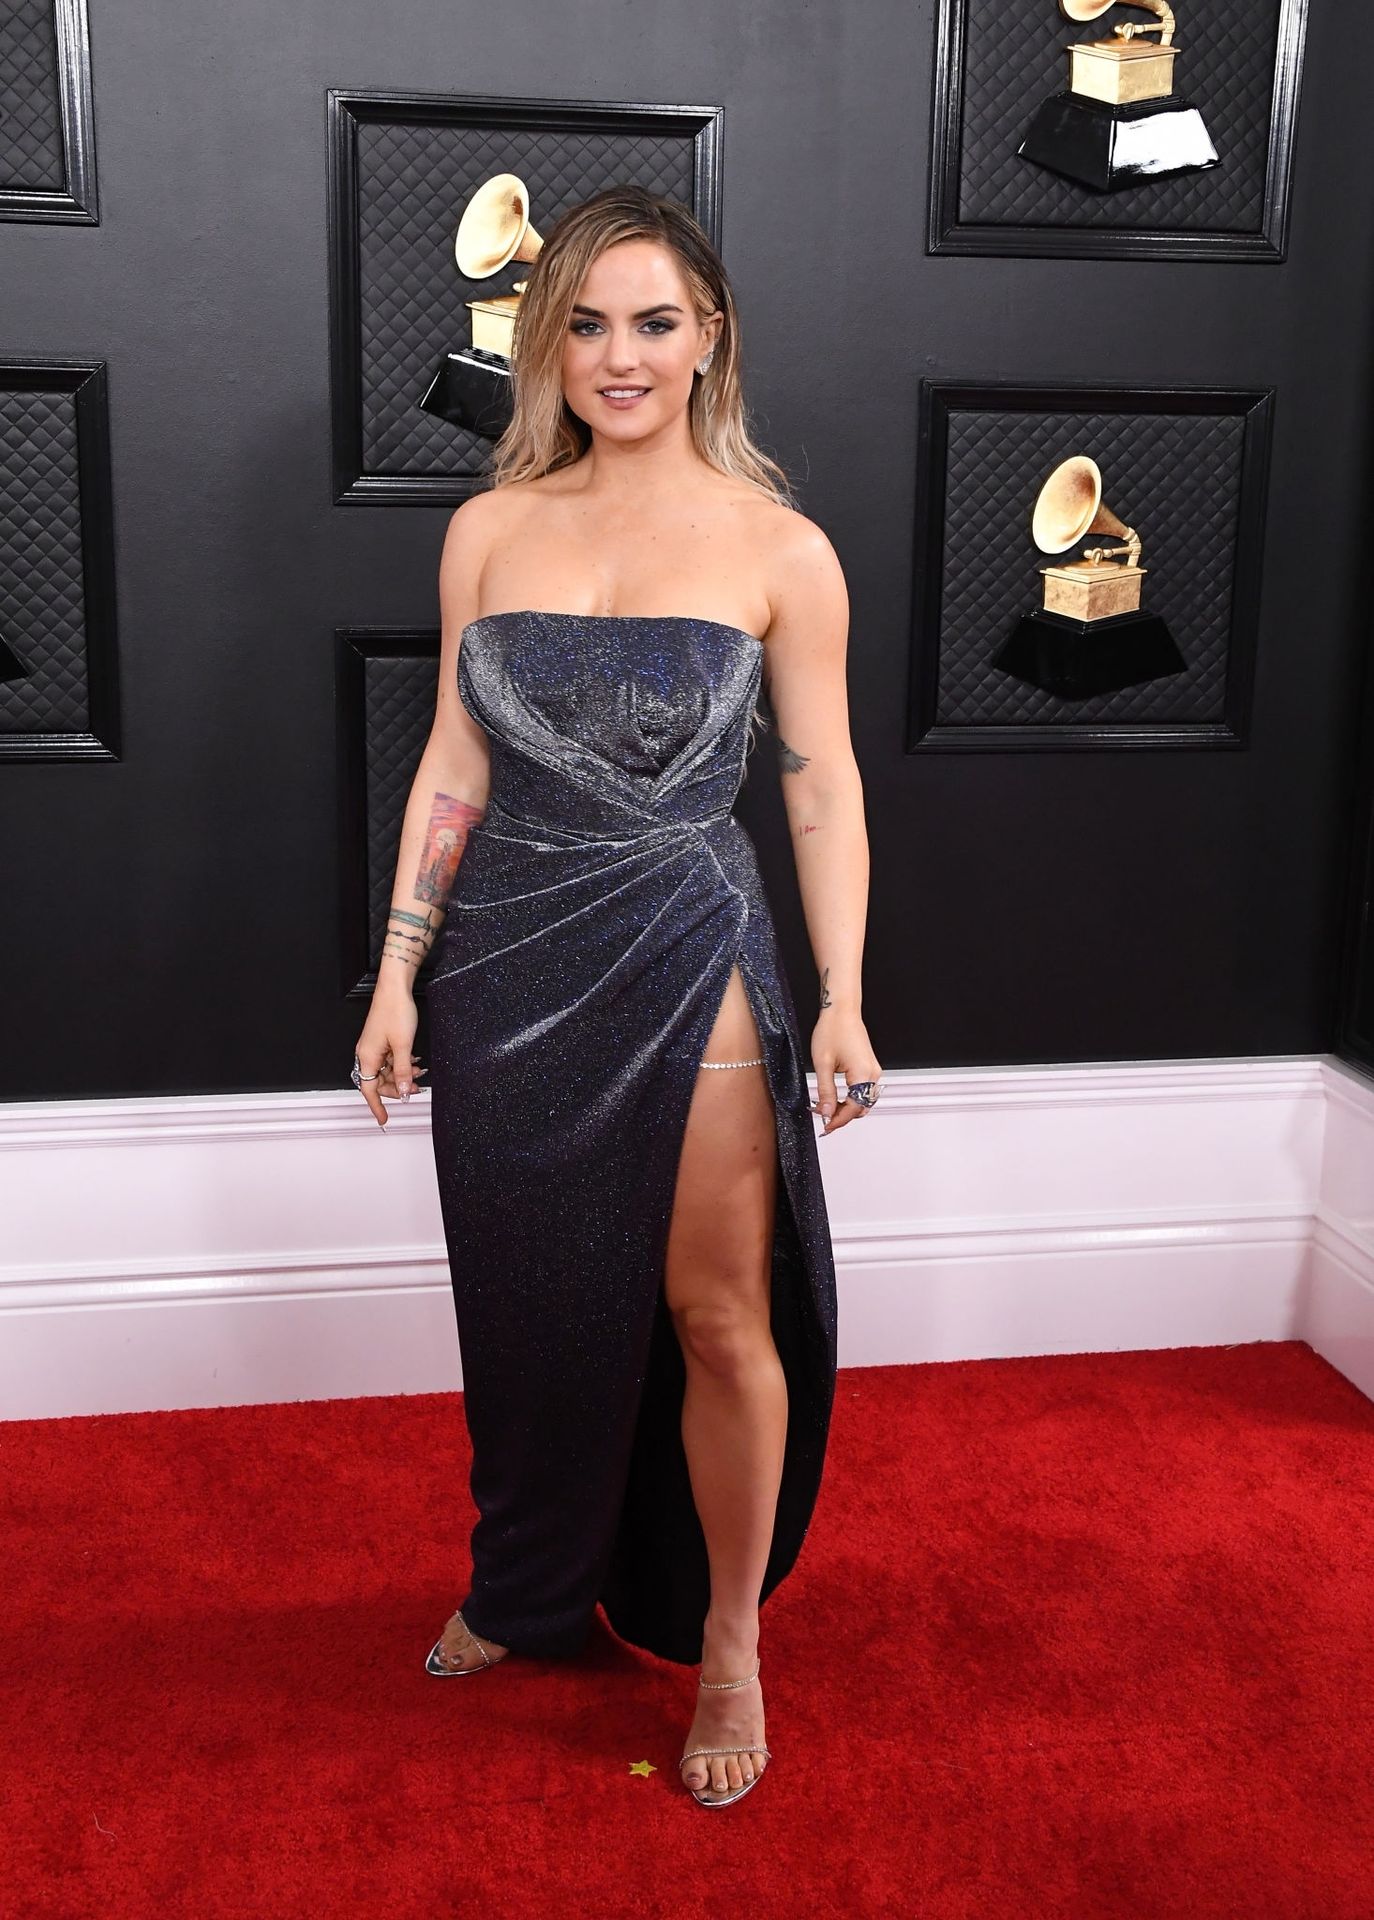 Jojo Shows Her Legs And Cleavage At The 62nd Annual Grammy Awards 0021